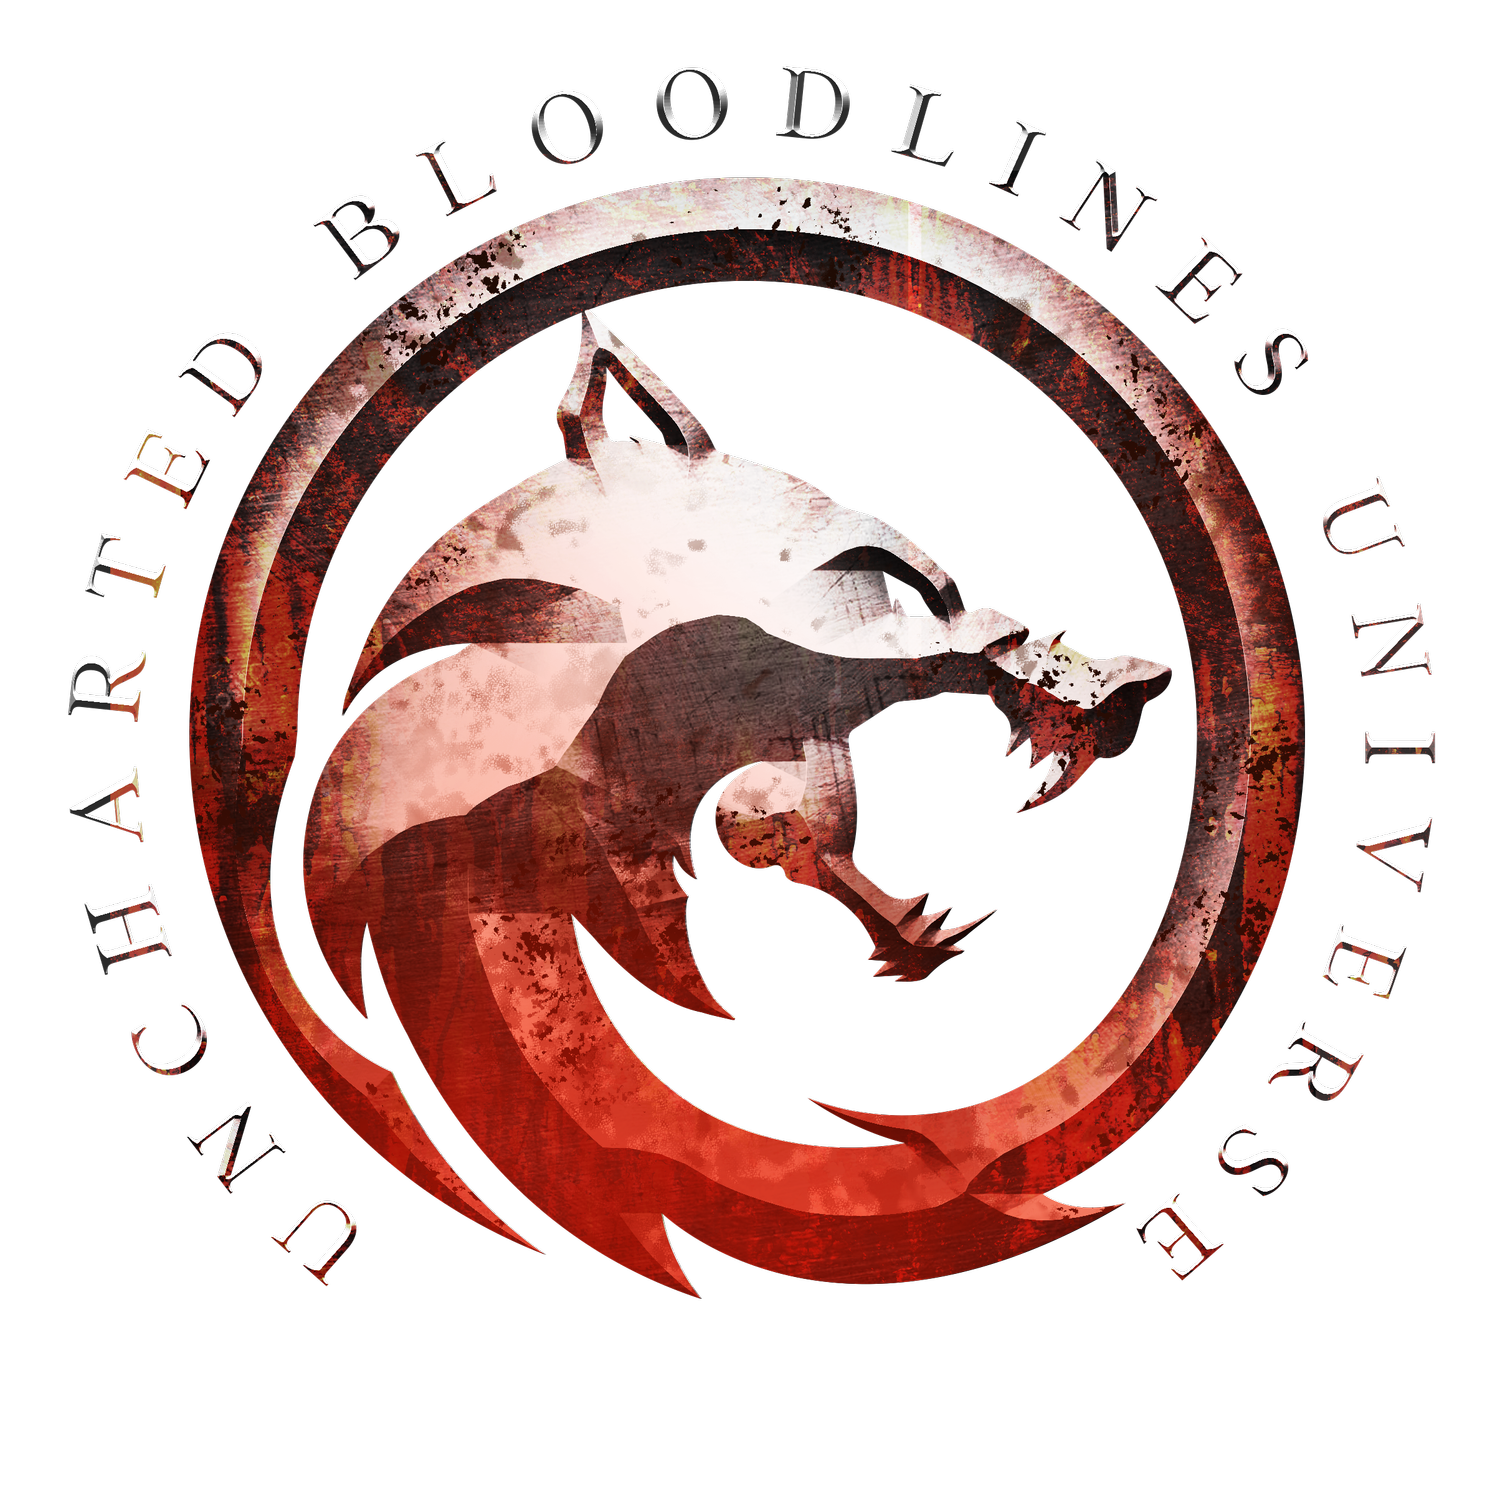 Uncharted Bloodlines